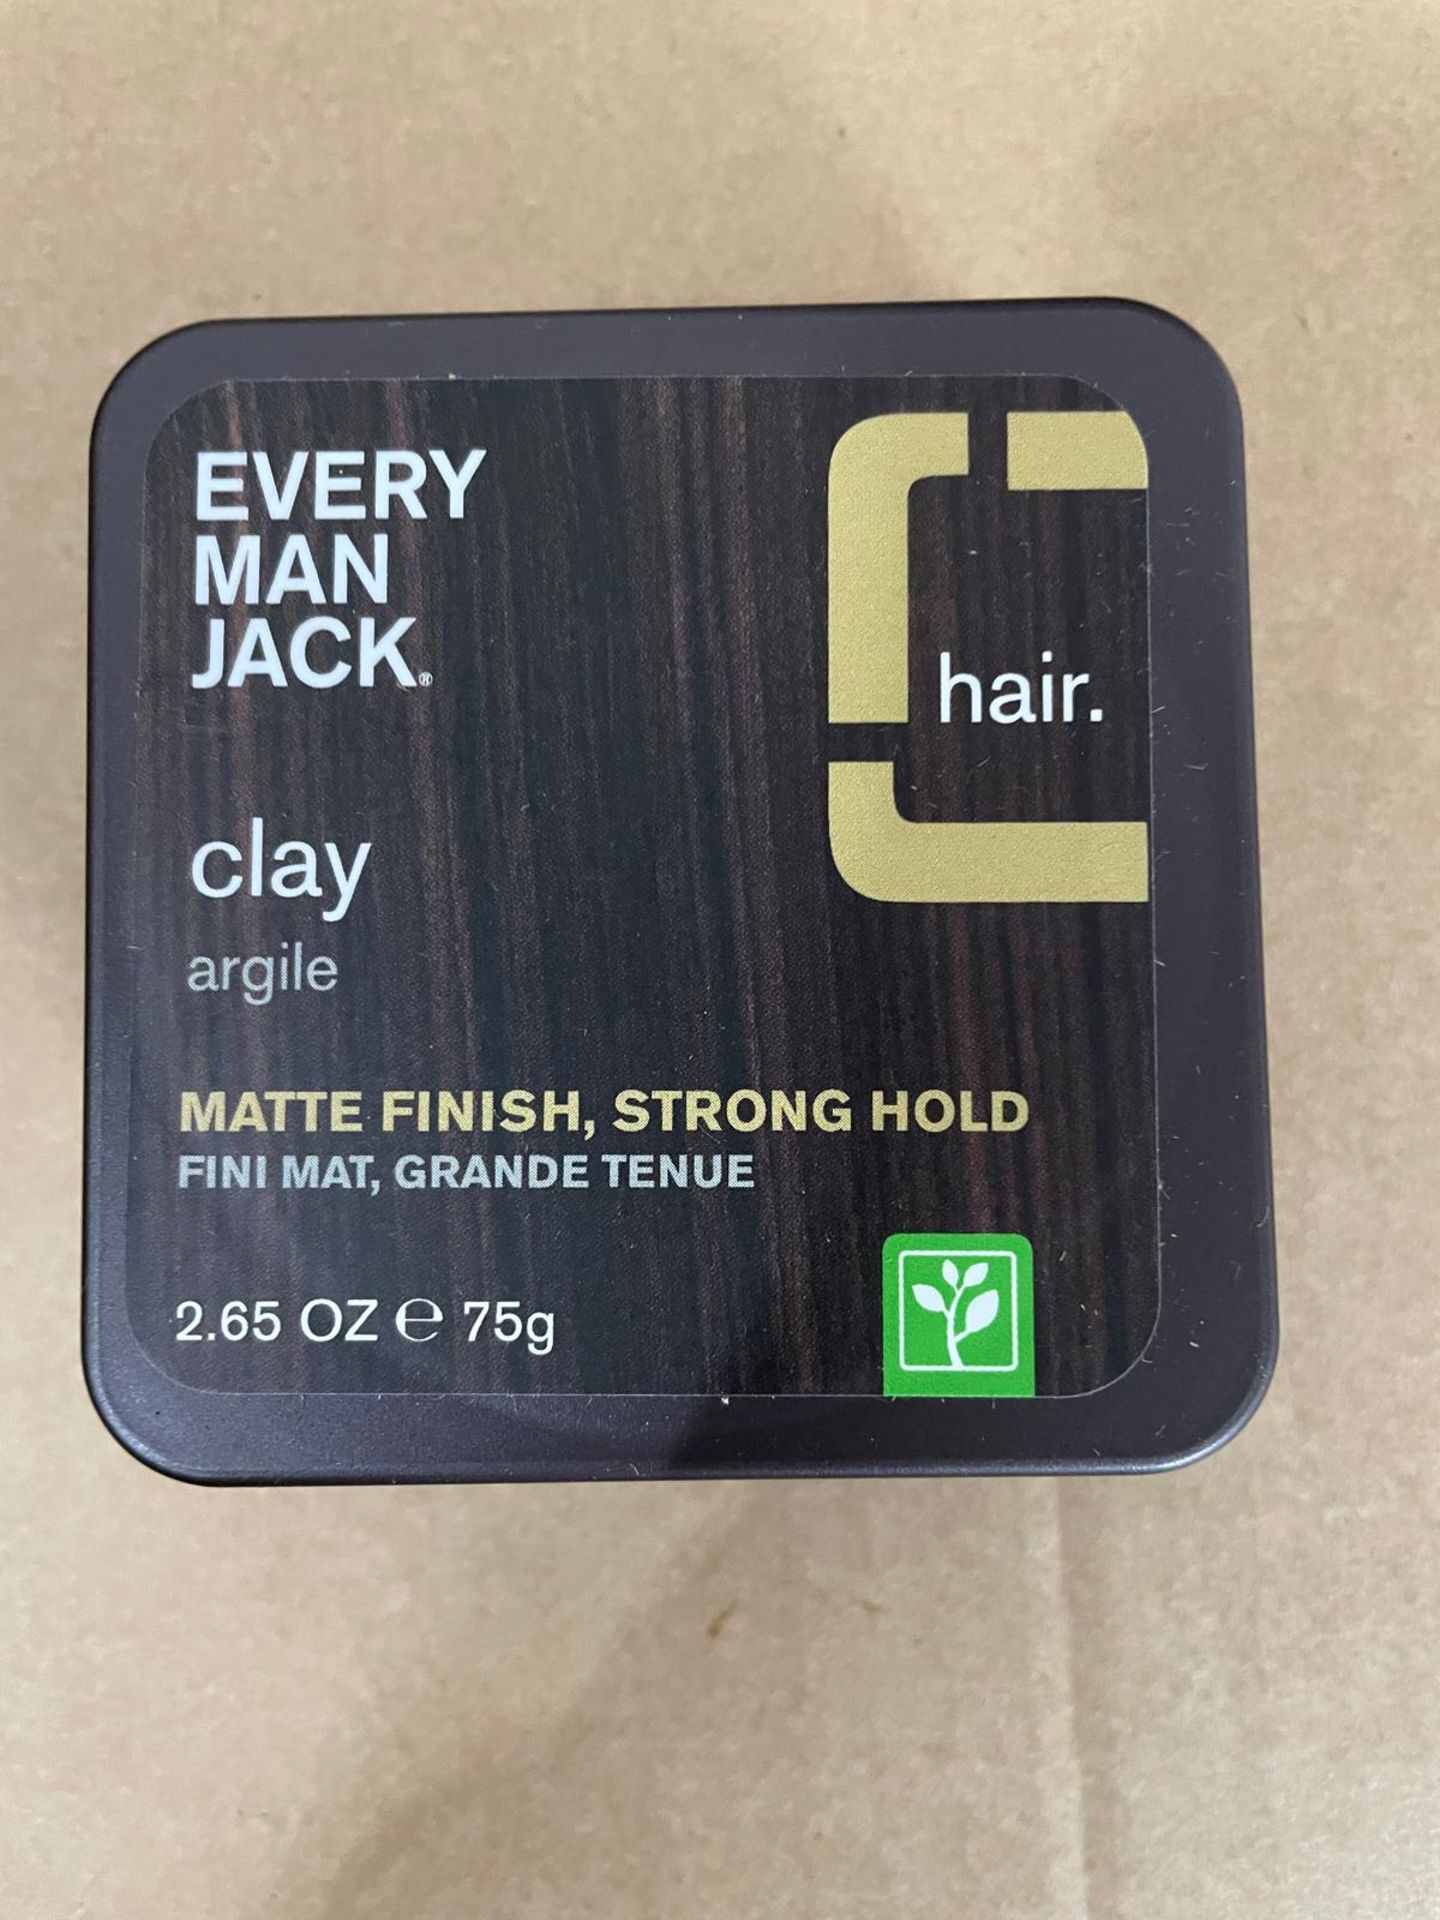 Every Man Jack Hair Styling Clay x90, Est Retail Value £900